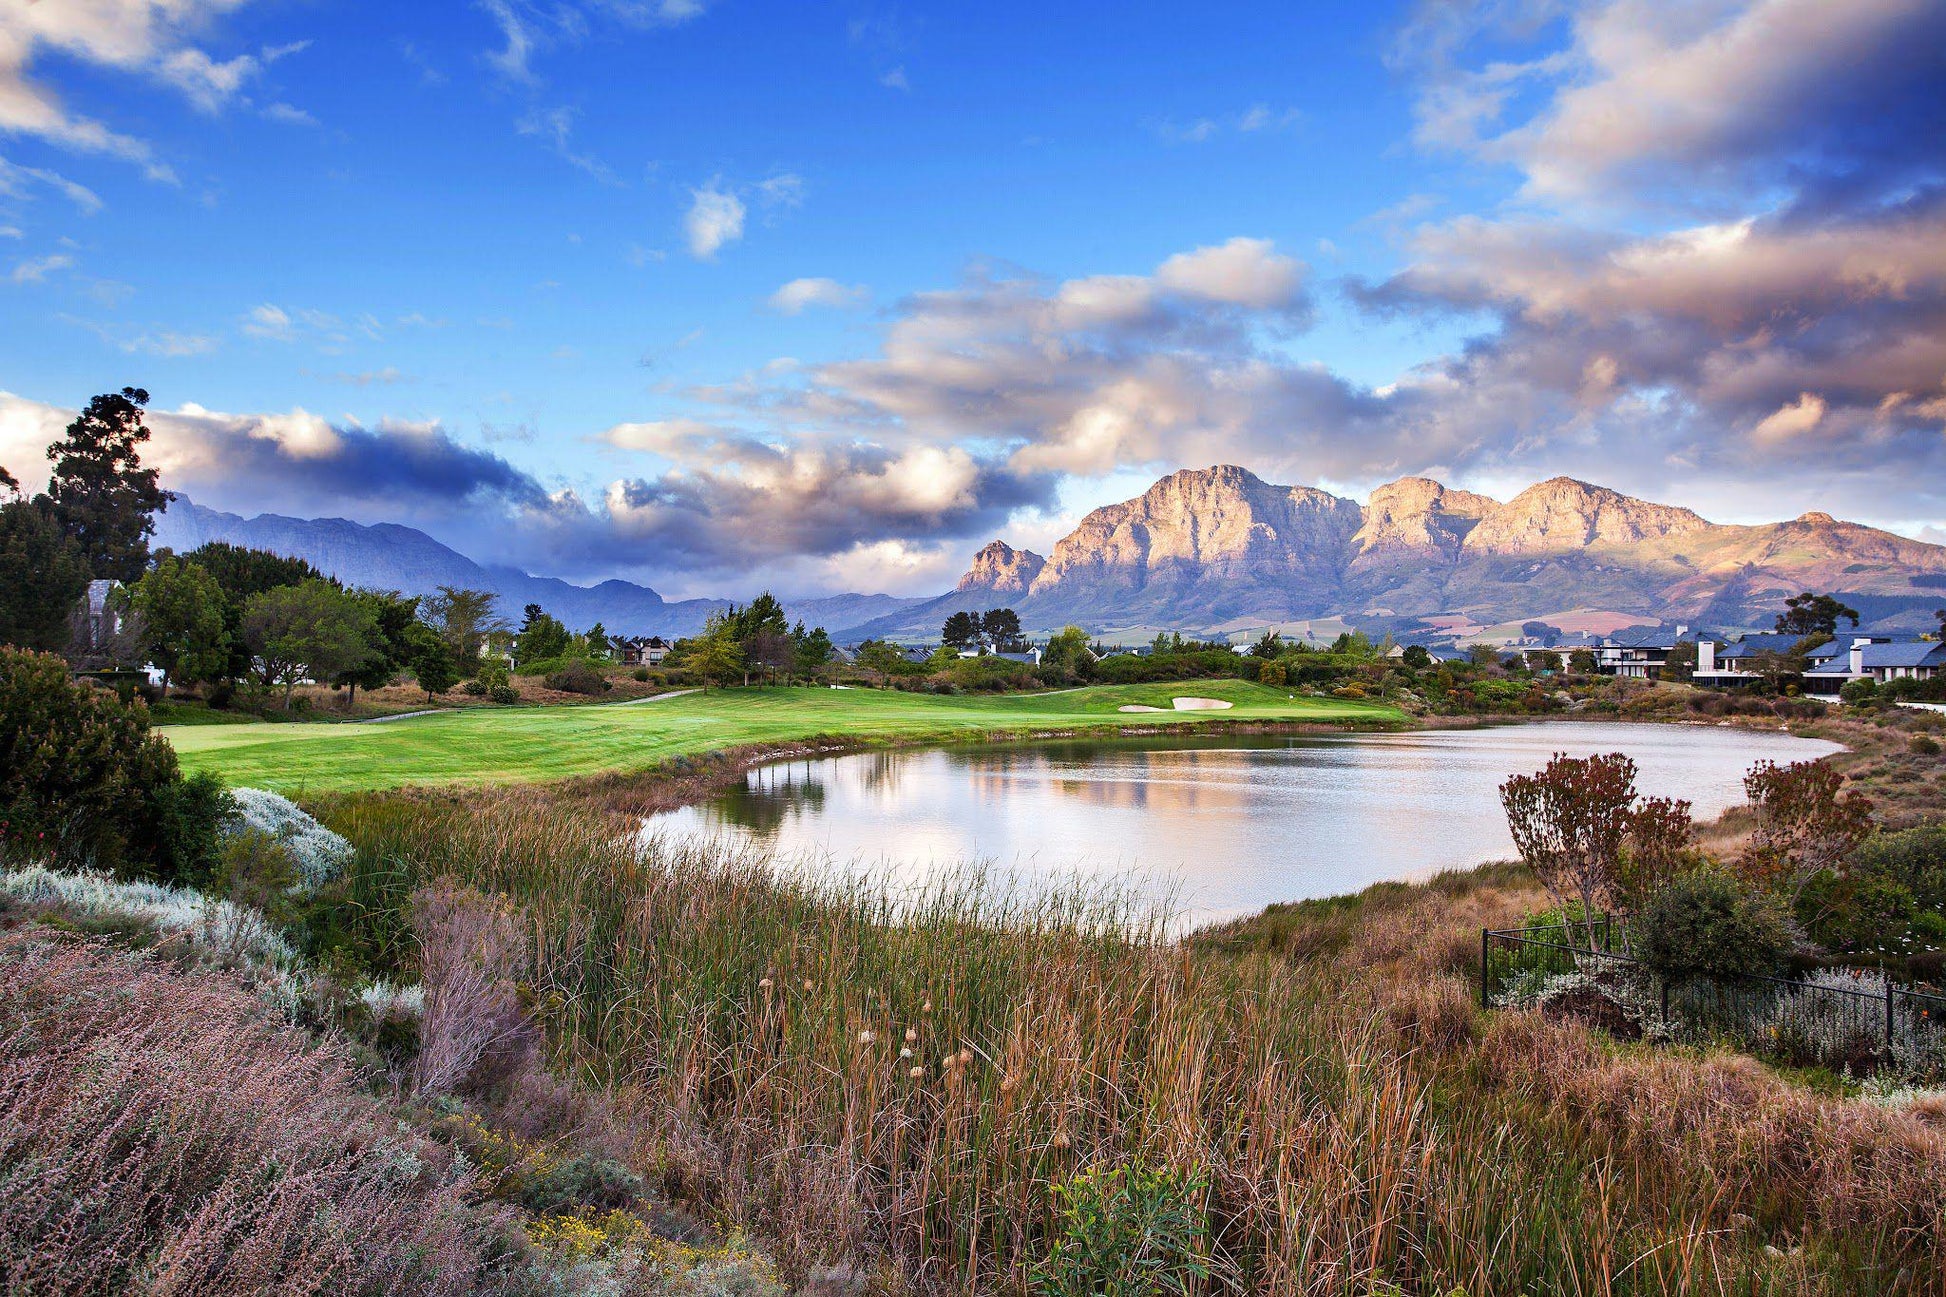 Nature, Complementary Colors, Ball Game, Sport, Golfing, Pearl Valley Jack Nicklaus Signature golf course, Pearl Valley Jack Nicklaus Signature golf course R301 Wemmershoek, Road, Paarl, 7646